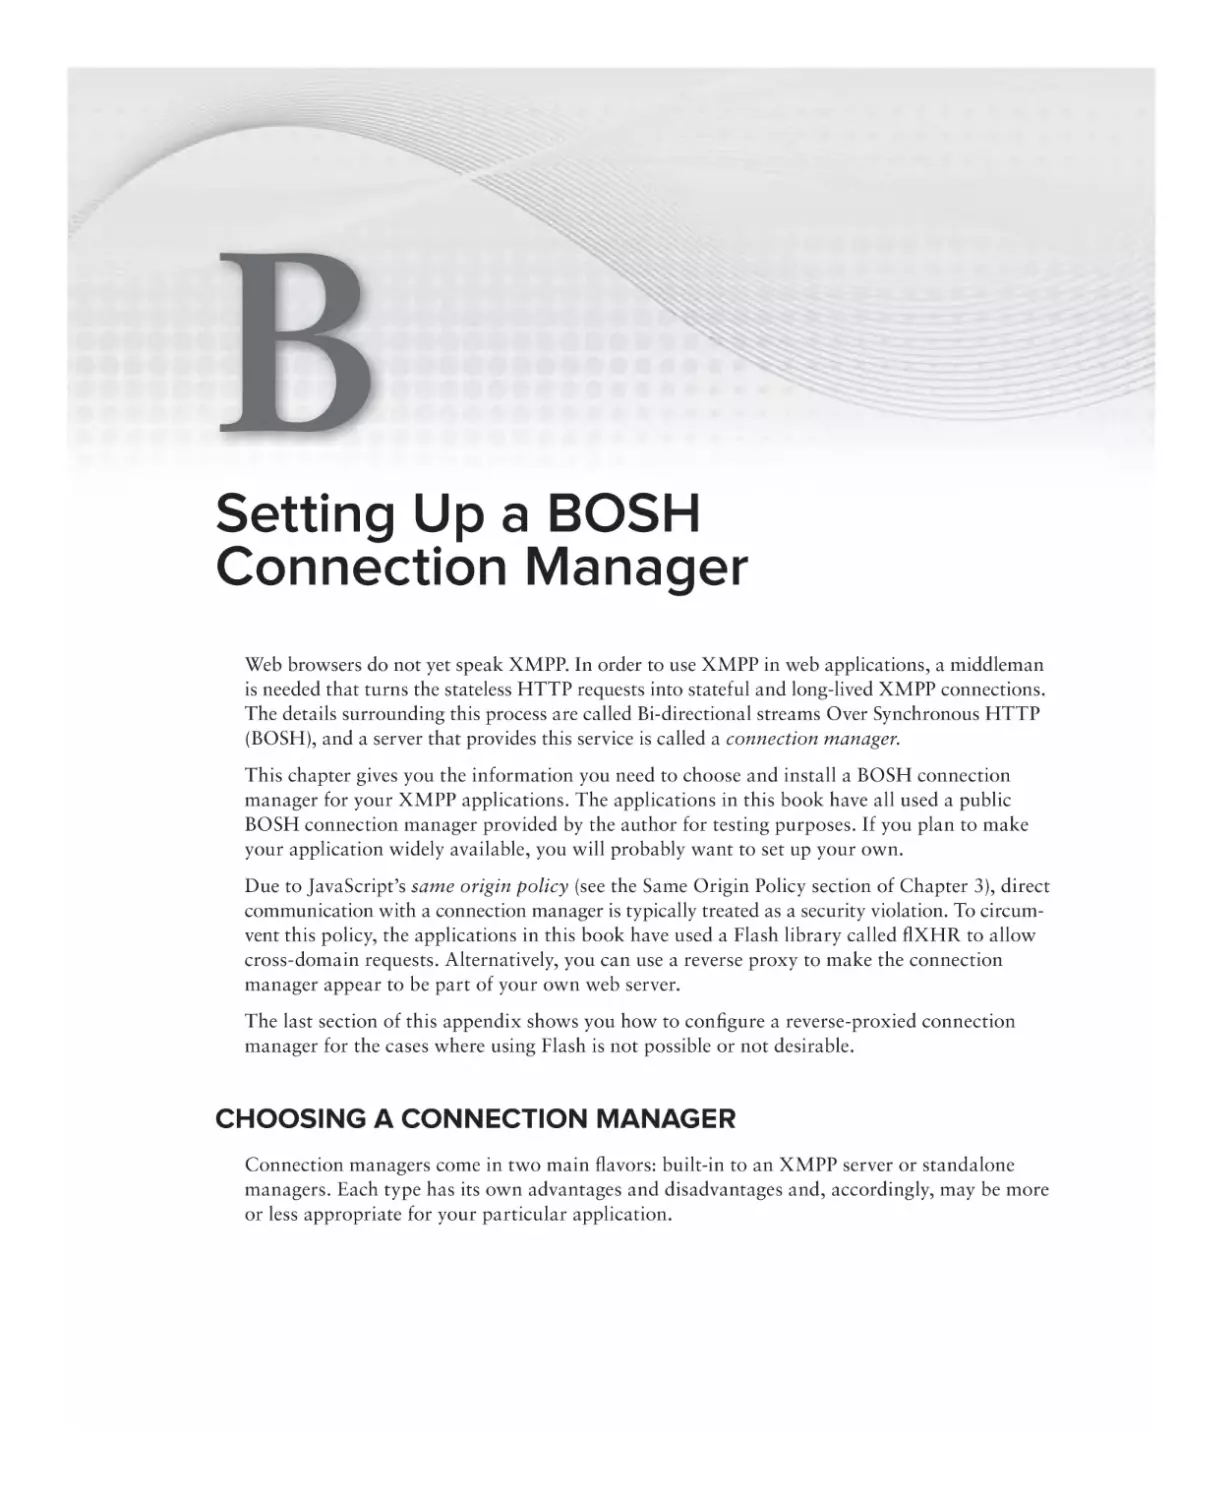 Appendix B
Choosing a Connection Manager